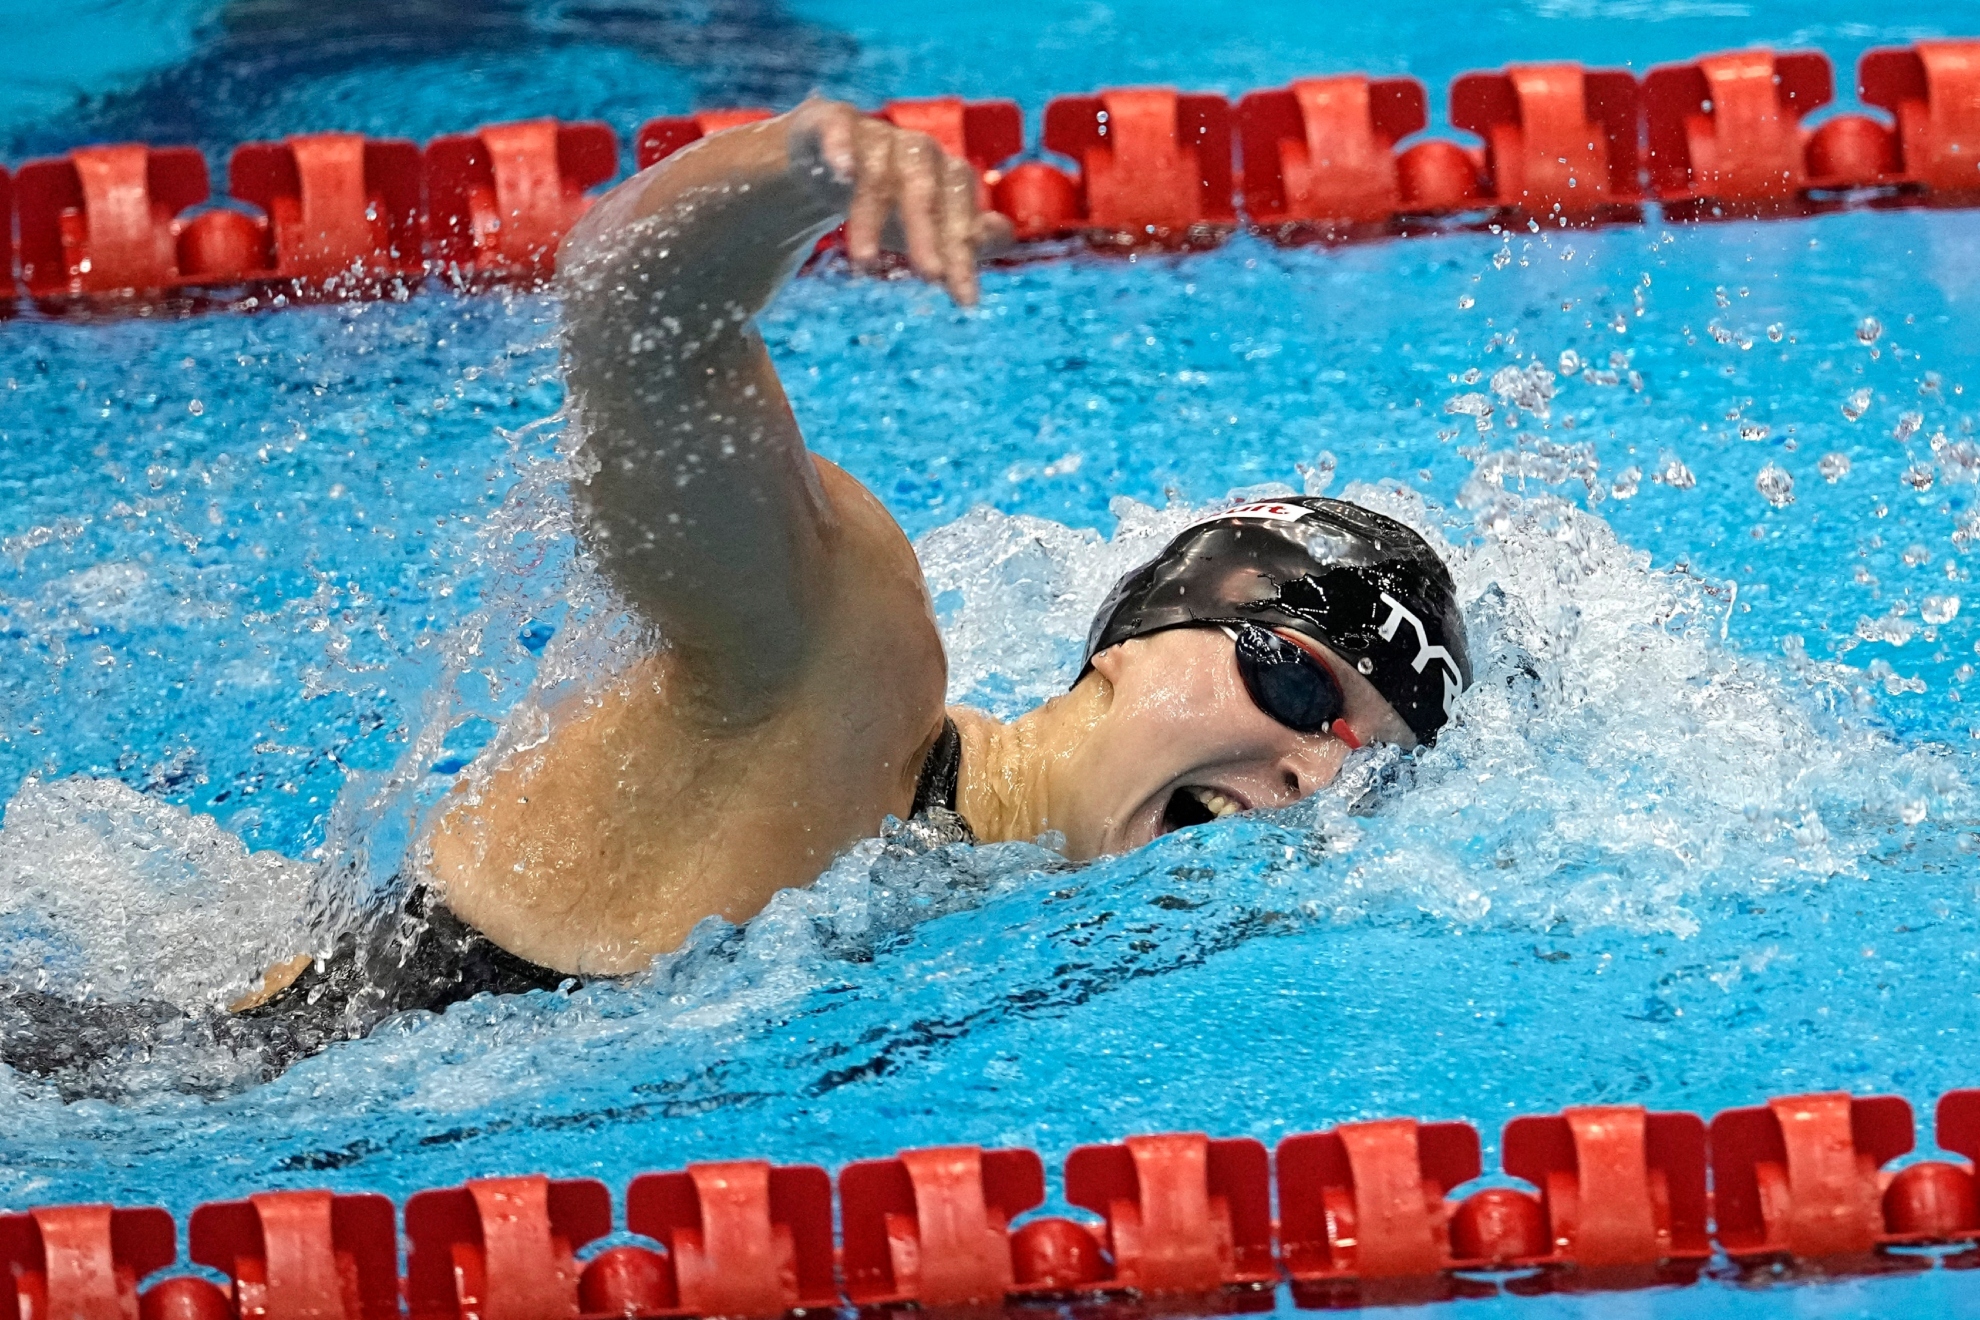 Ledecky, one of the big U.S. casualties ahead of the World Championship